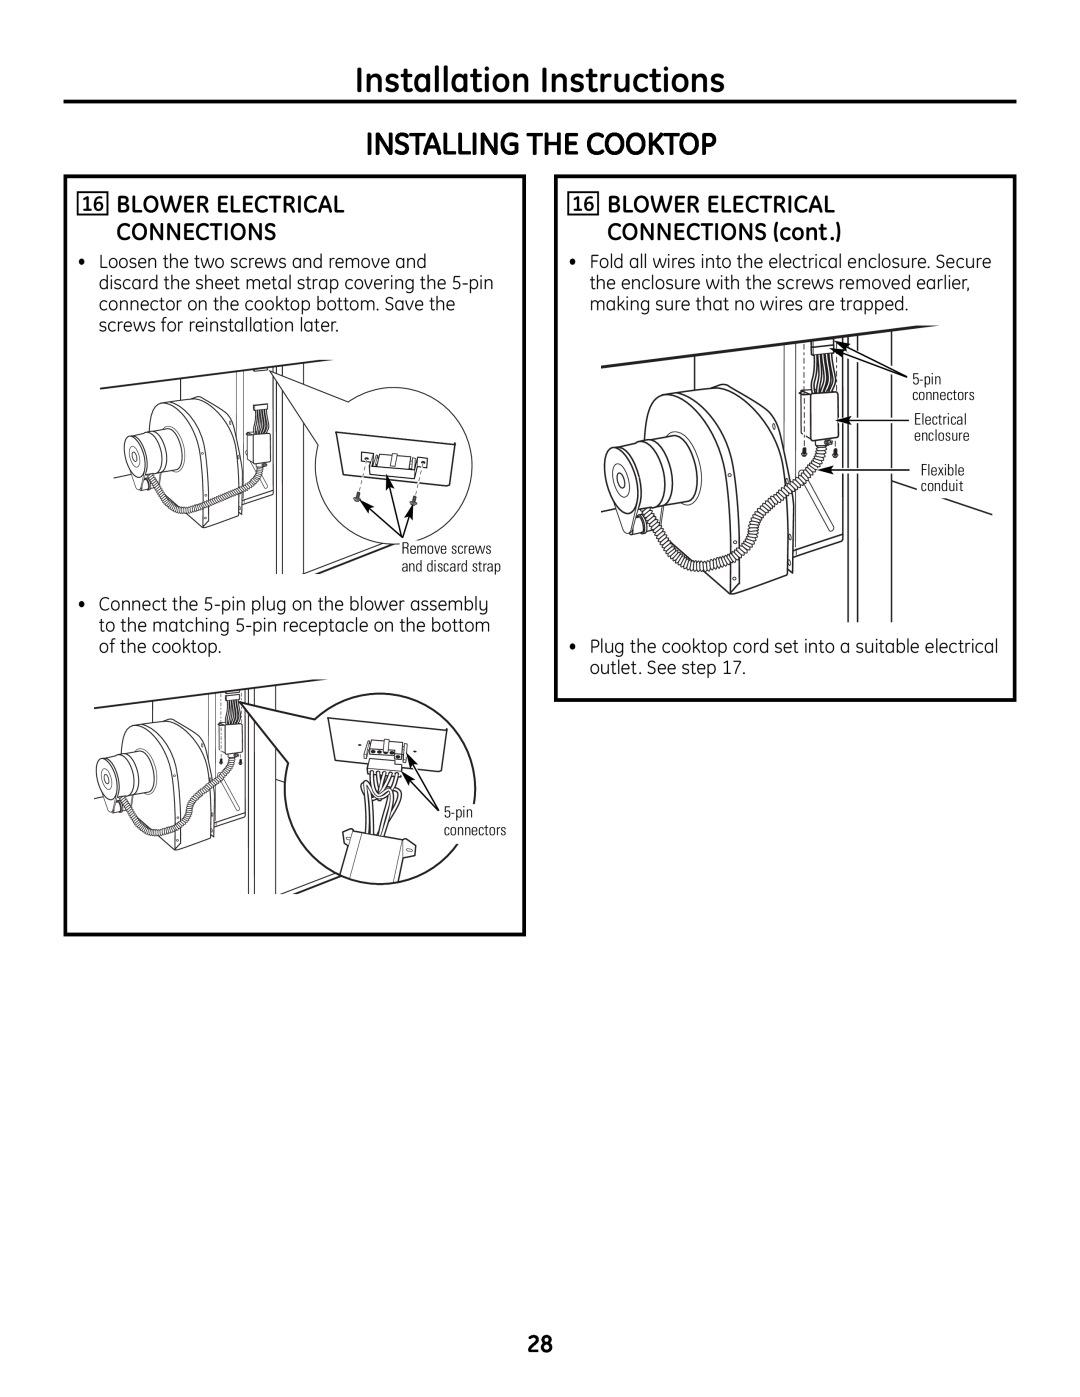 GE PGP989 manual Installation Instructions, Installing The Cooktop, 16BLOWER ELECTRICAL CONNECTIONS cont 